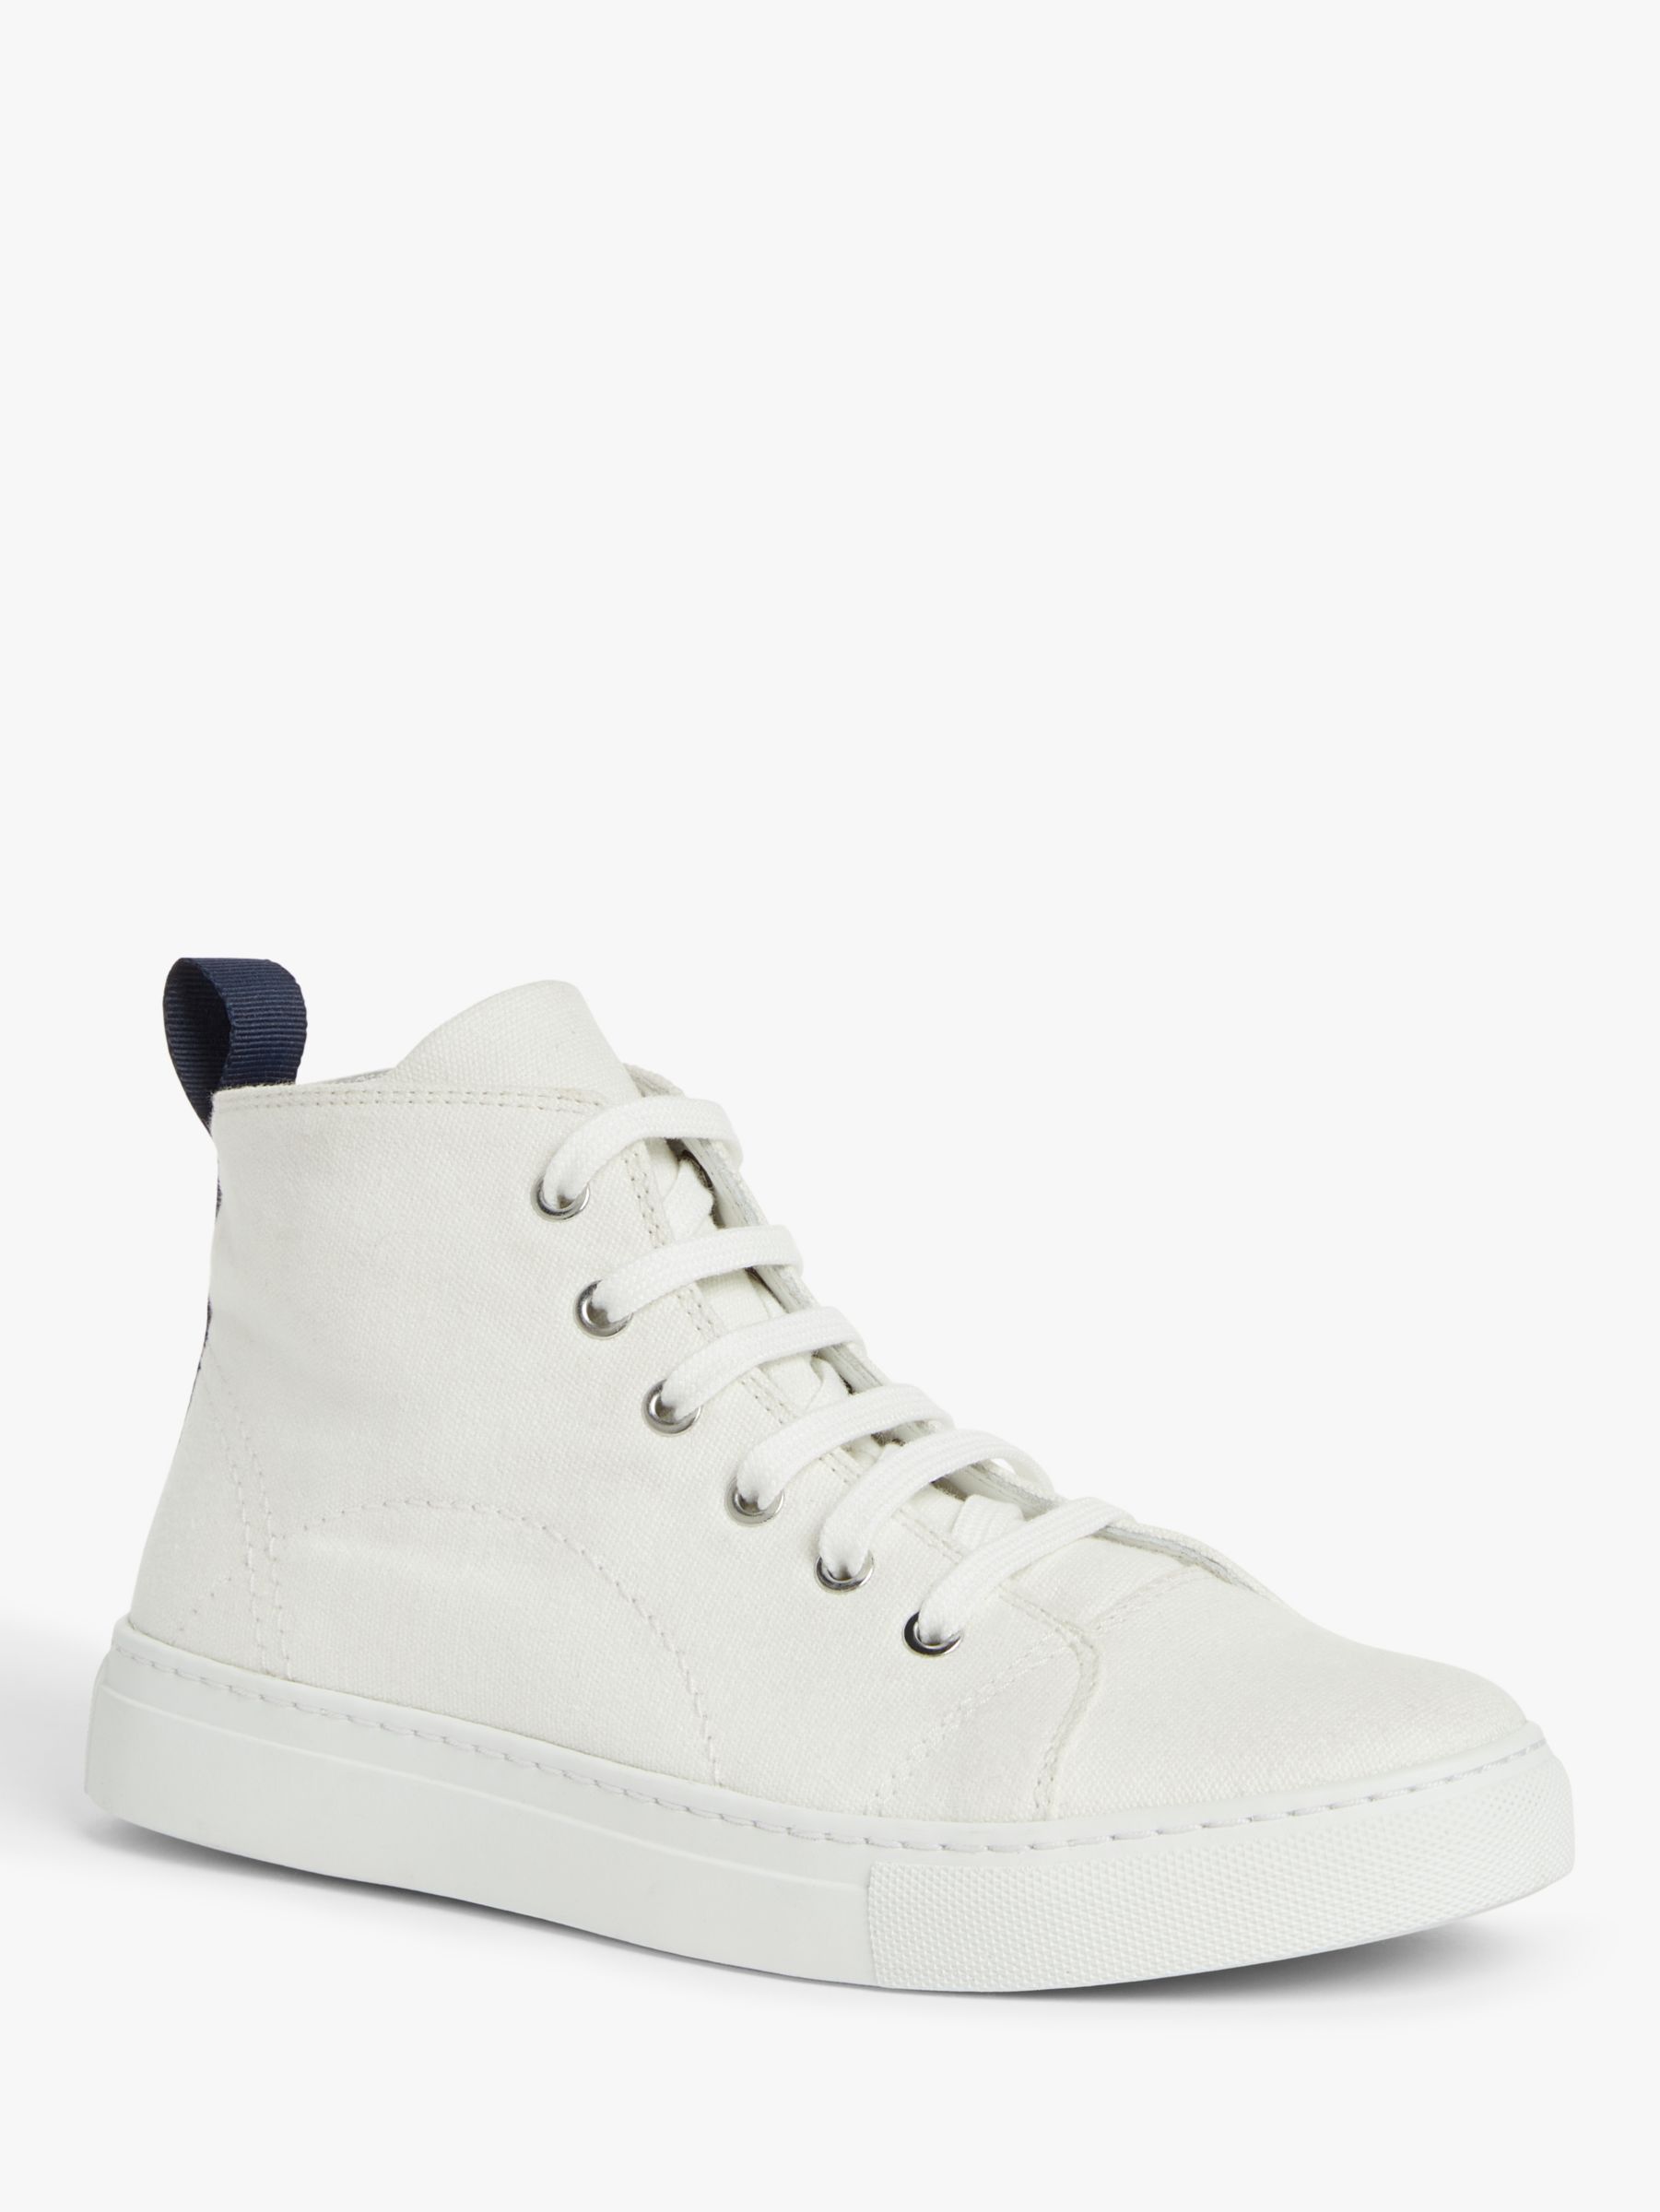 Kin Eain Canvas Lace Up Hi Top Trainers, White